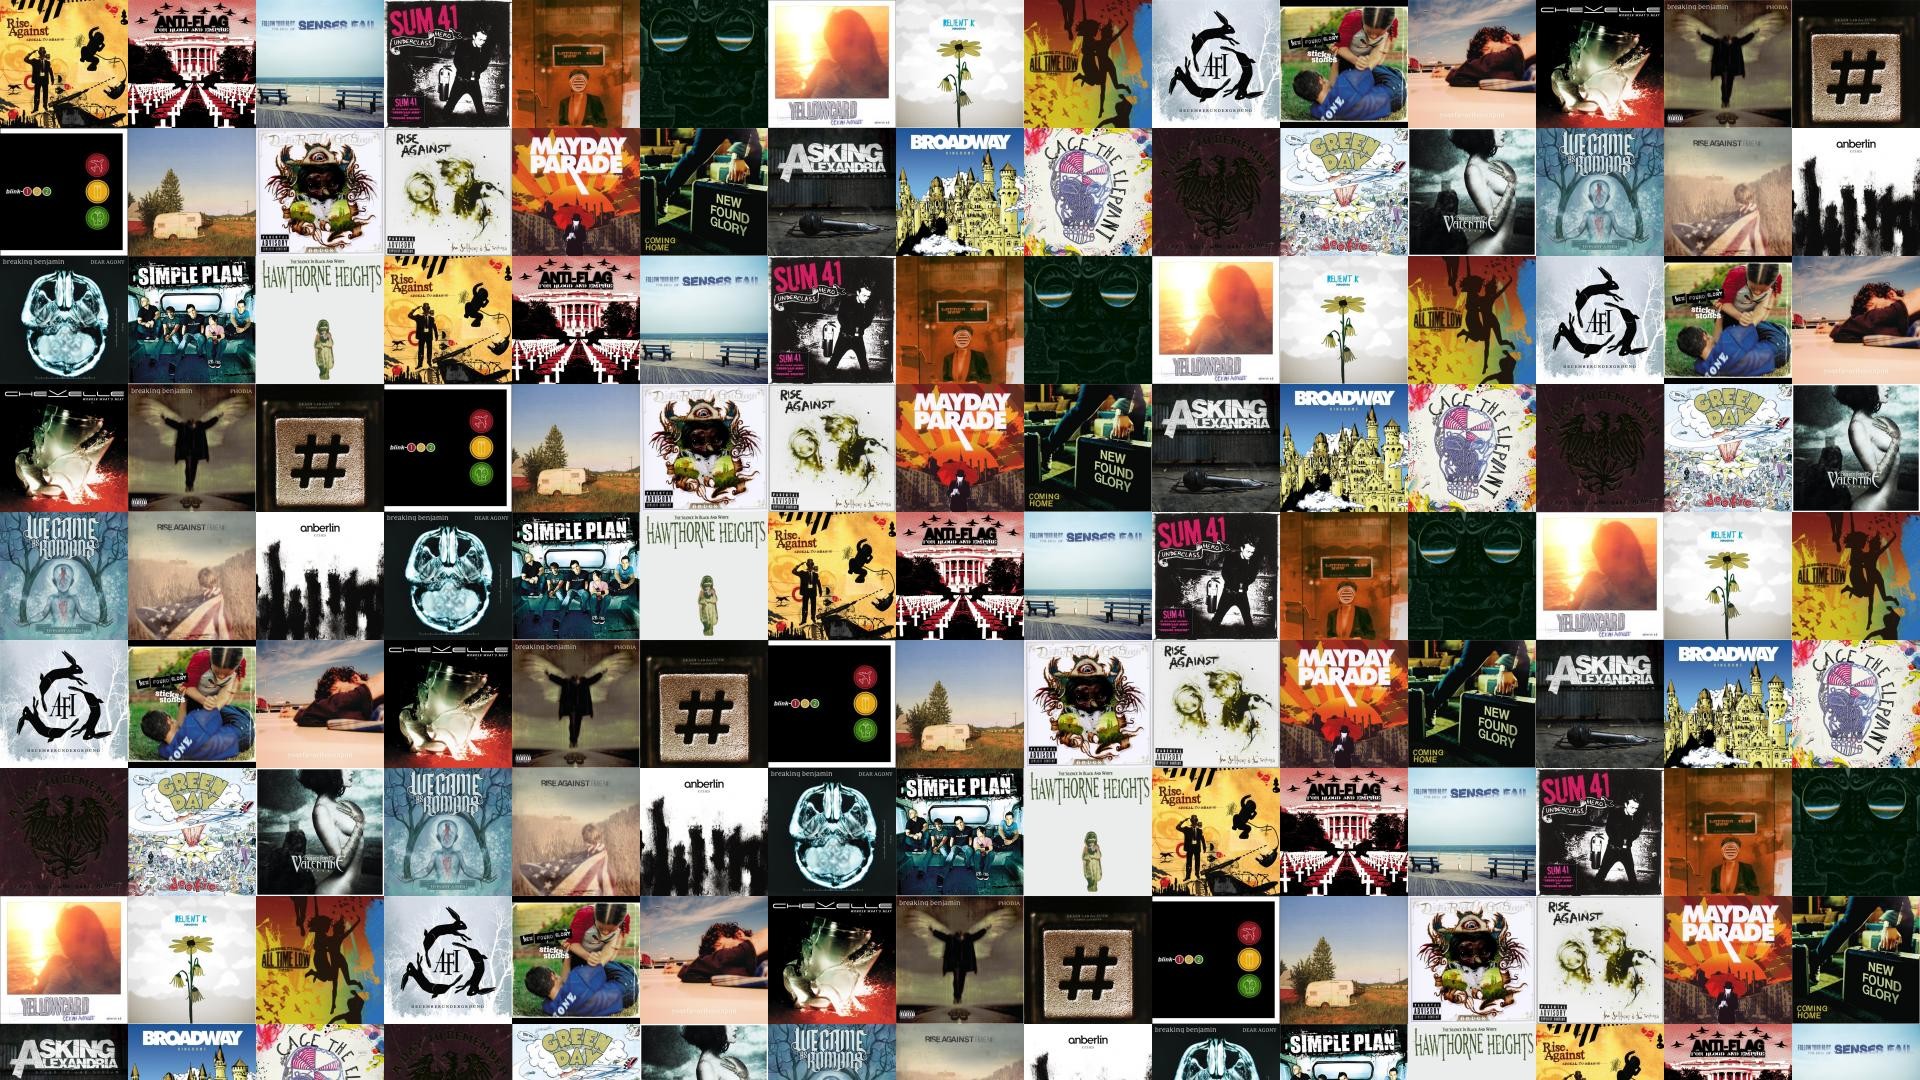 1920x1080 Download this free wallpaper with images of Rise Against – Appeal To  Reason, Anti-flag – For Blood And Empire, Senses Fail – Follow Your Bliss,  ...